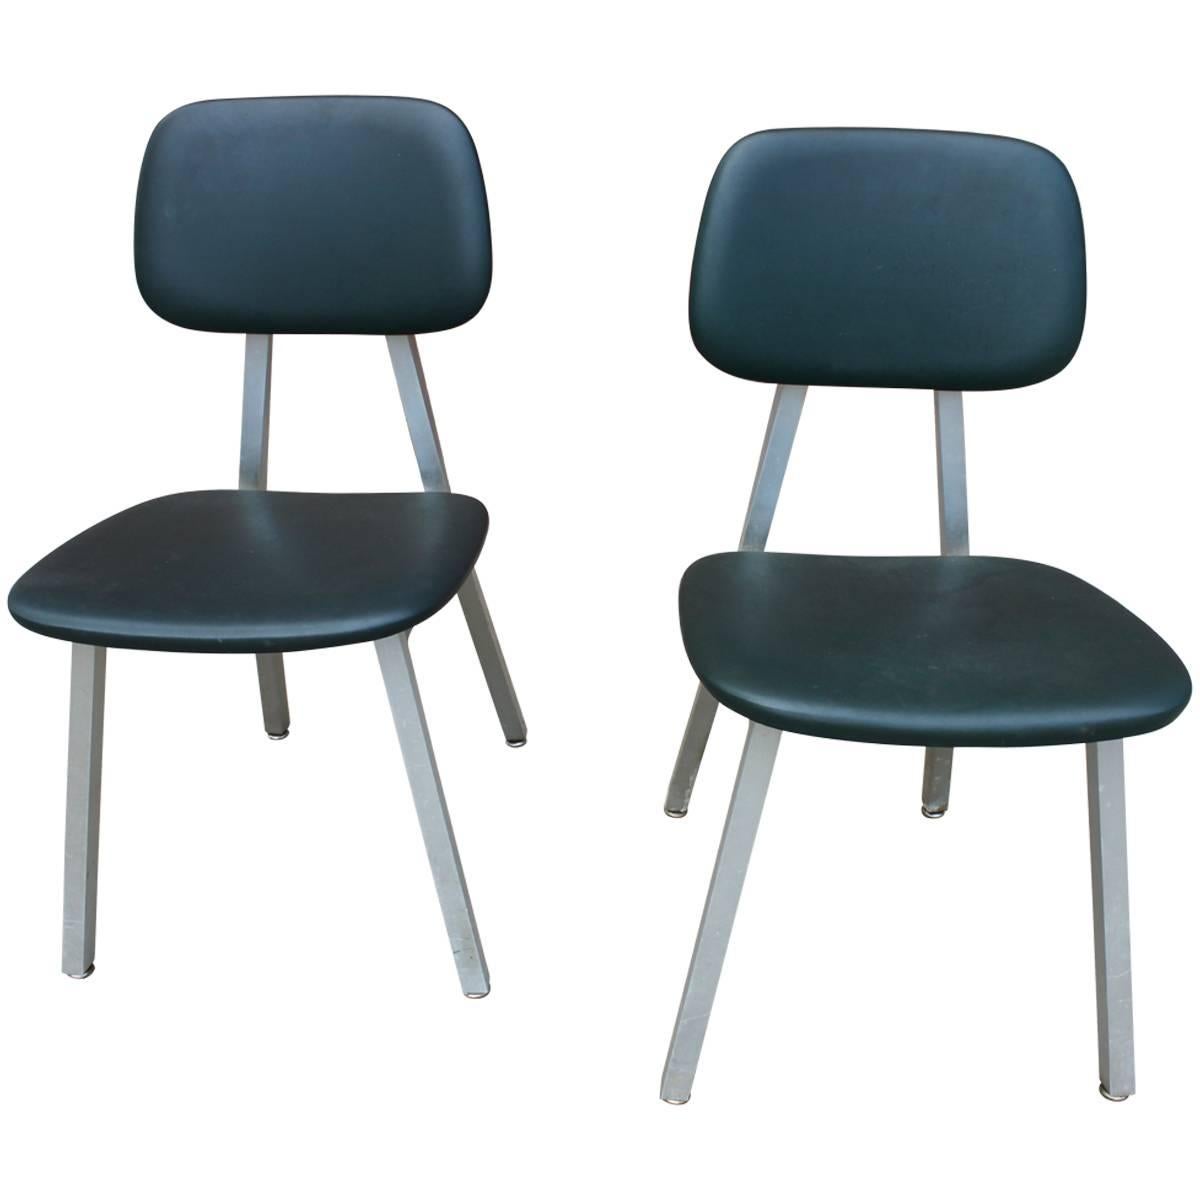 Pair of Mid-Century Modern Industrial Chairs For Sale